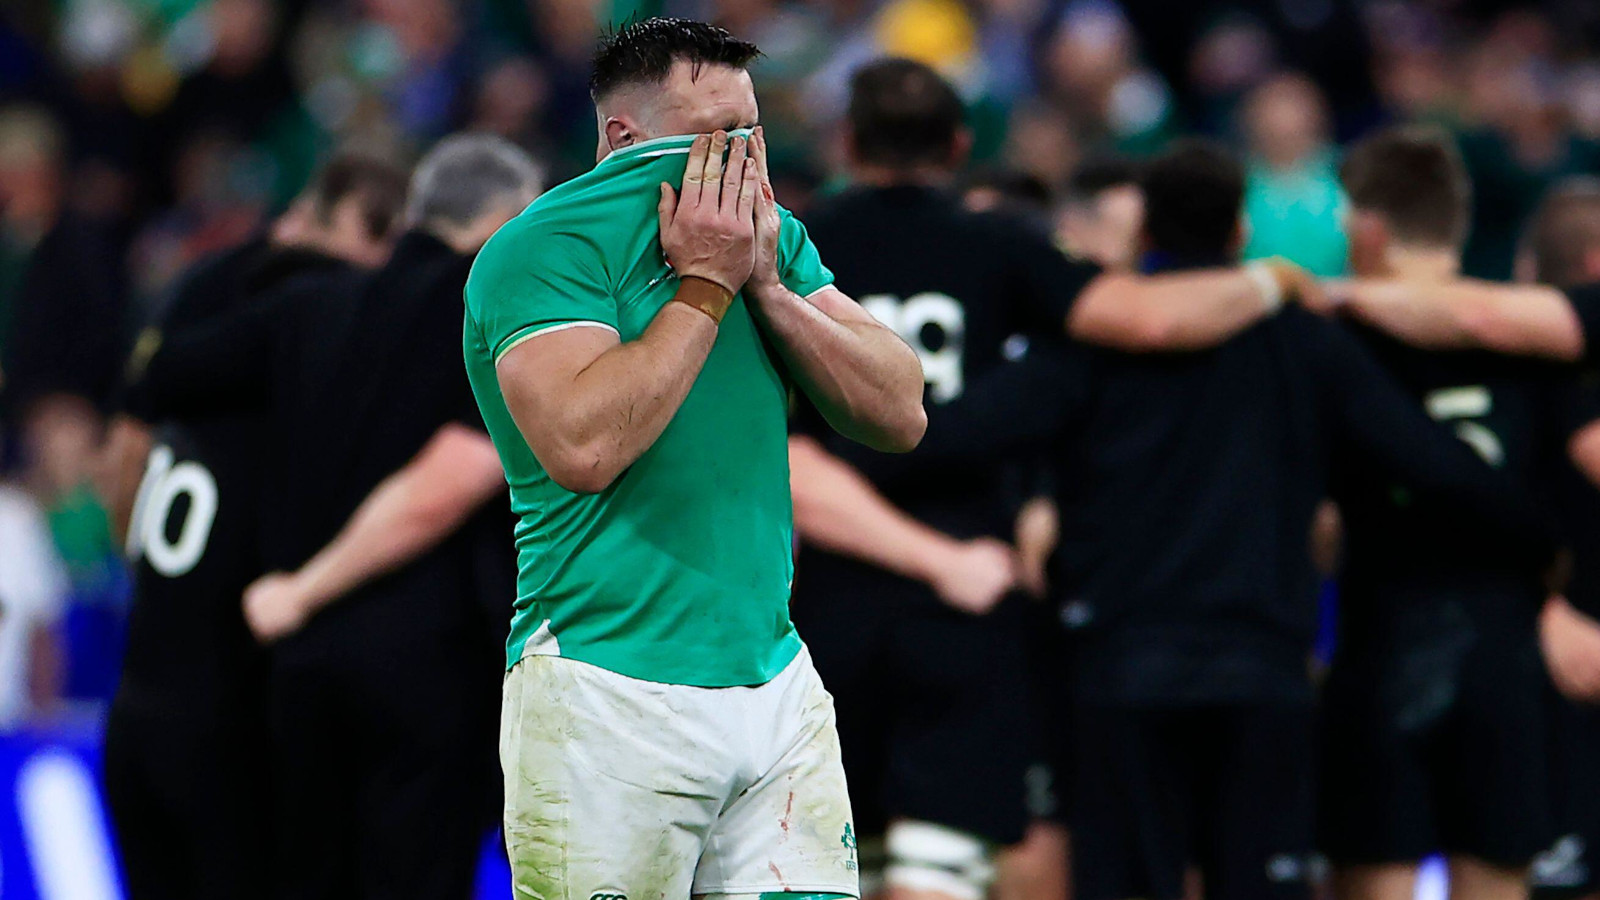 ireland forward opens up on ‘absolutely miserable’ post-rugby world cup experience